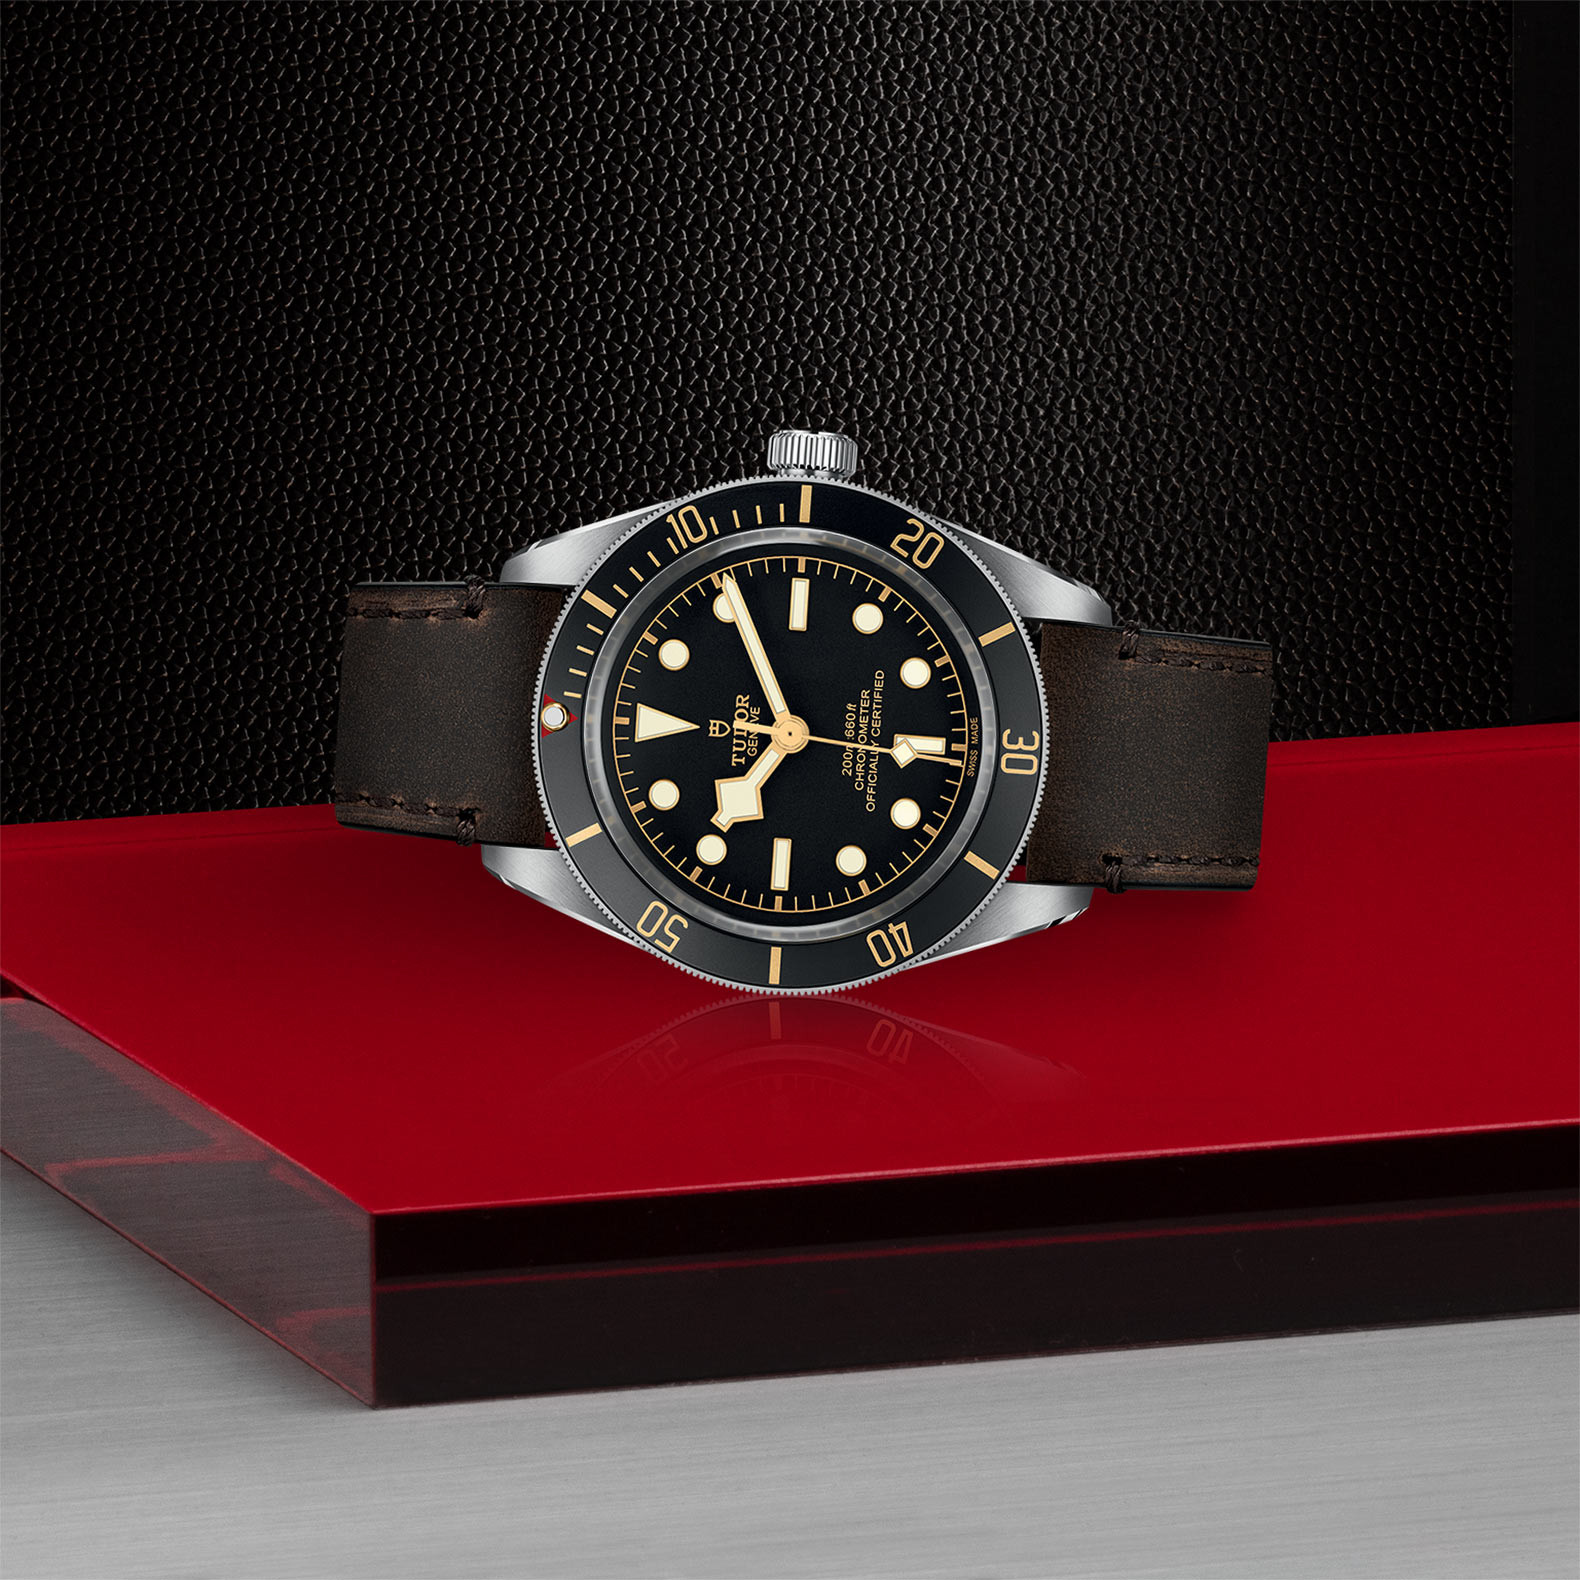 TUDOR Black Bay Fifty-Eight Watch in Store Laying Down